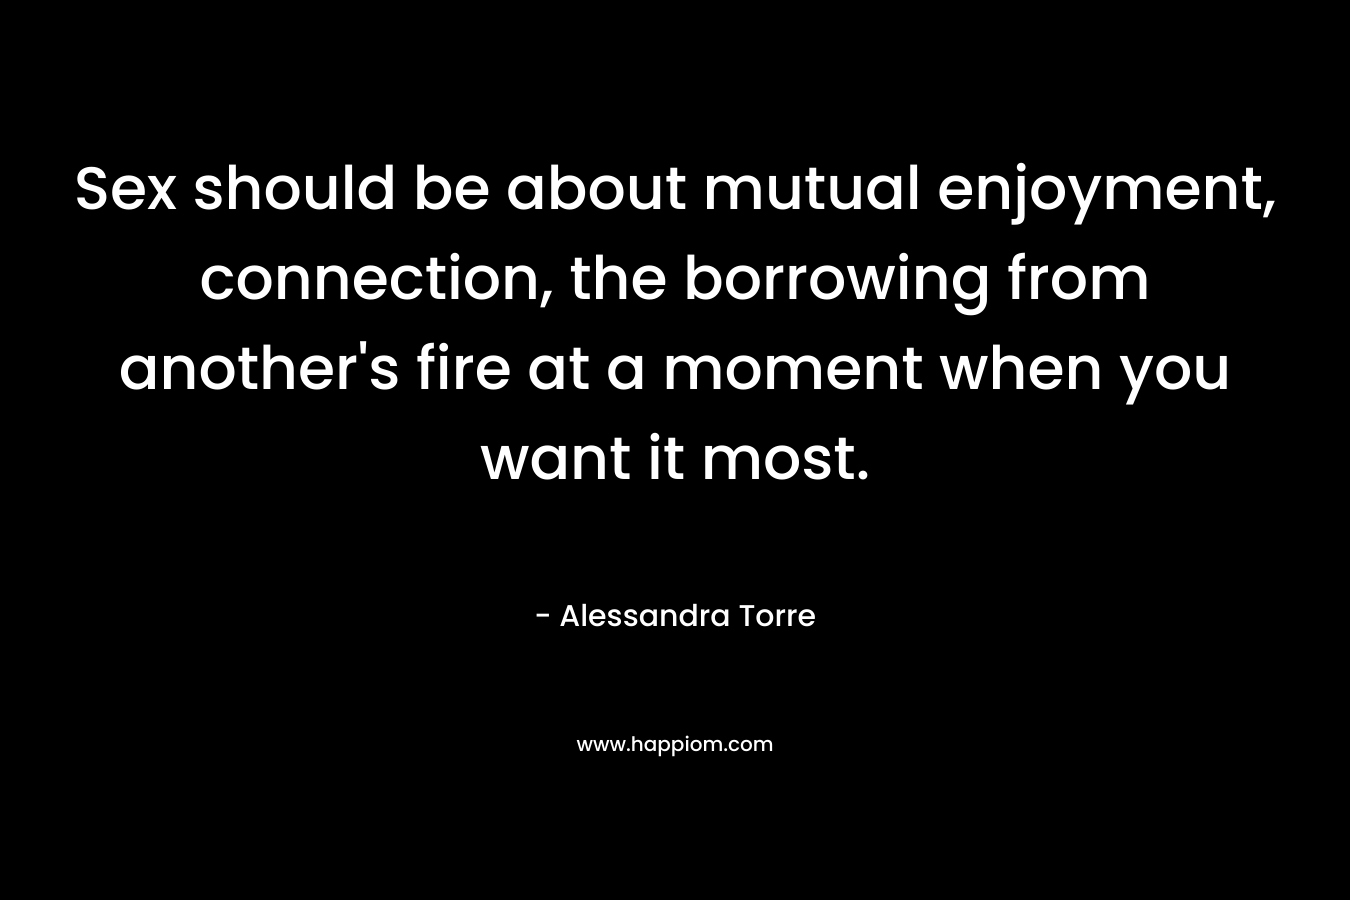 Sex should be about mutual enjoyment, connection, the borrowing from another’s fire at a moment when you want it most. – Alessandra Torre